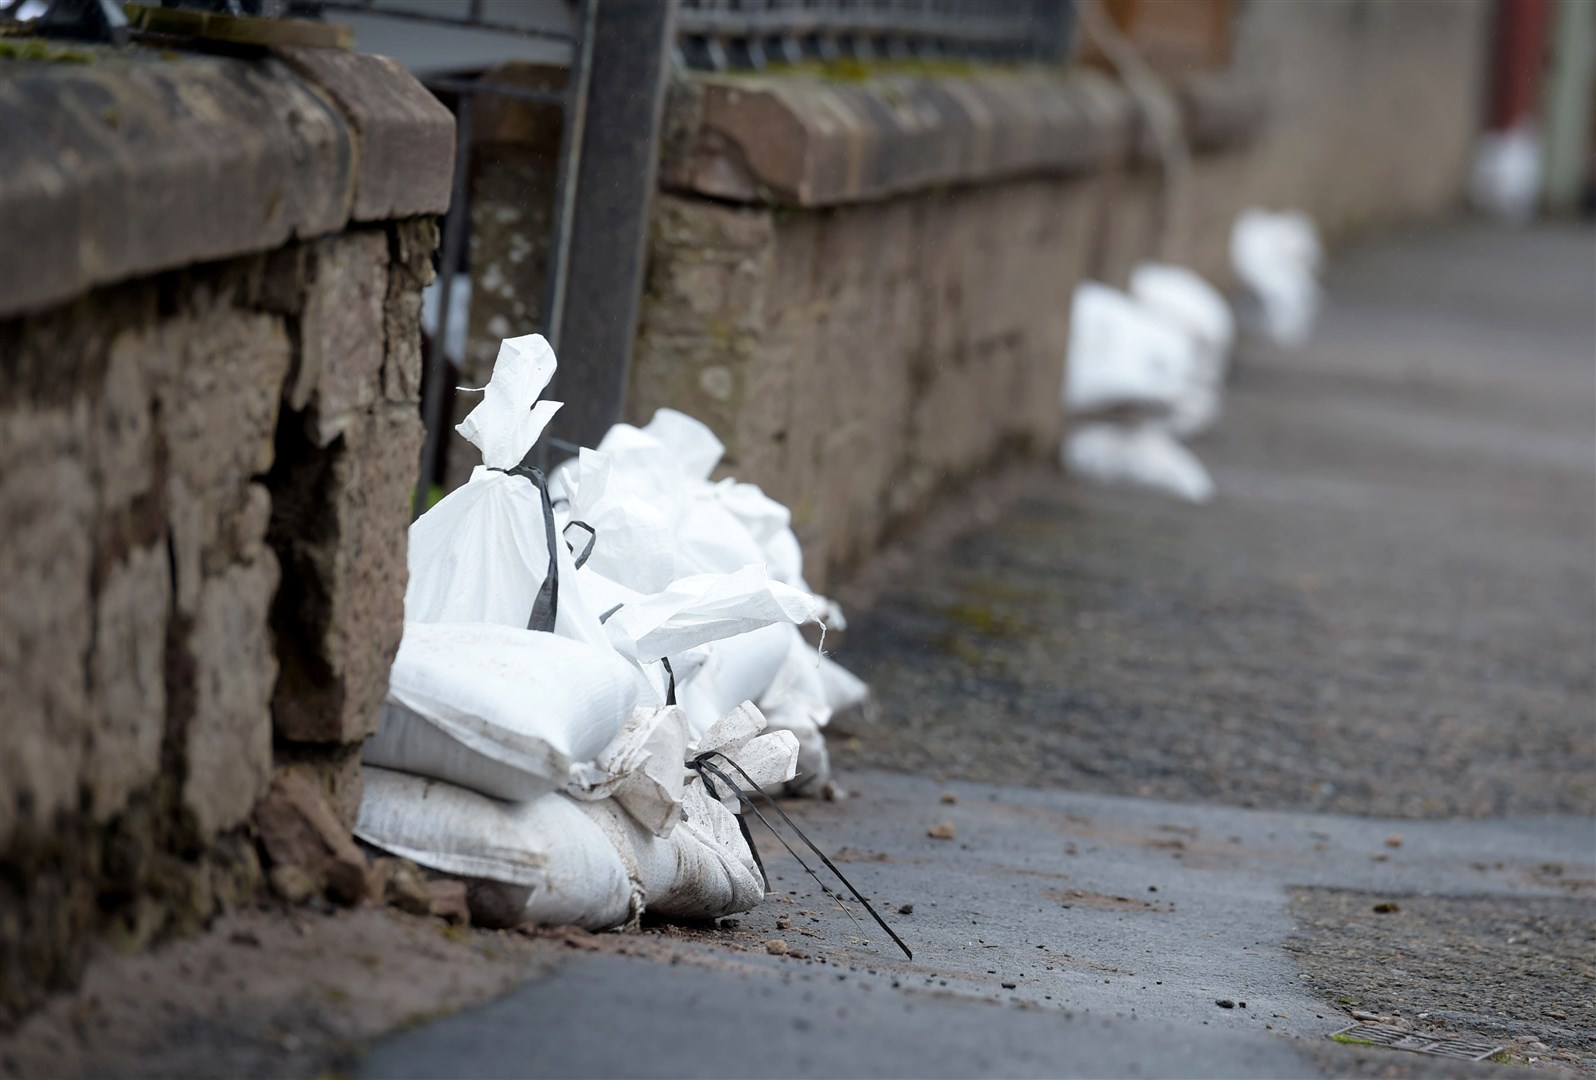 Sandbags in Burn Place, Dingwall following some of this summer's flooding.